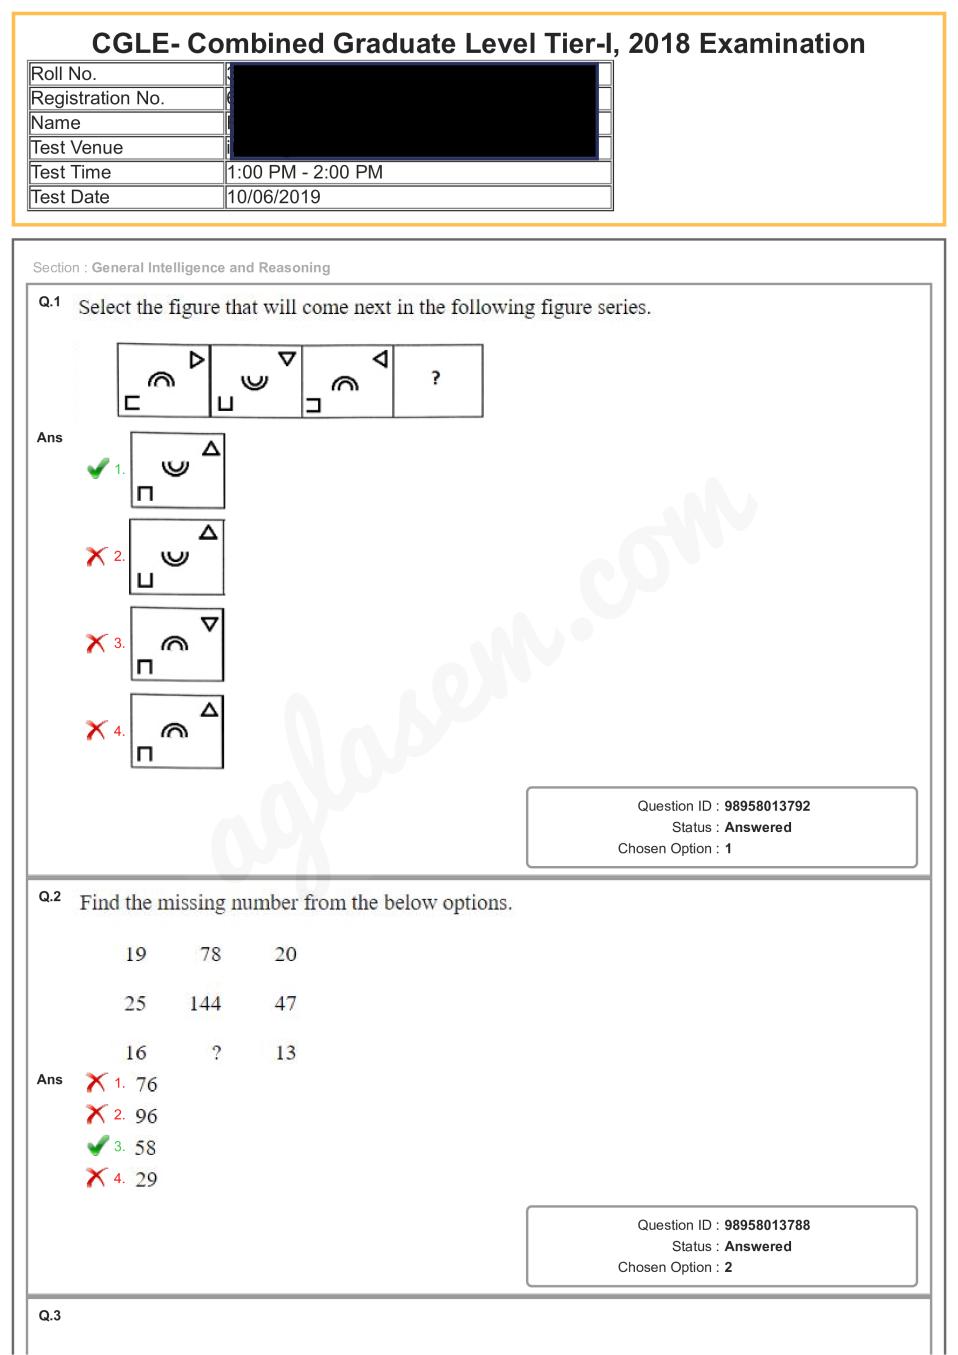 SSC CGL Question Paper Tier 1 2018 Exam - 10 jun 2019 second shift - Page 1